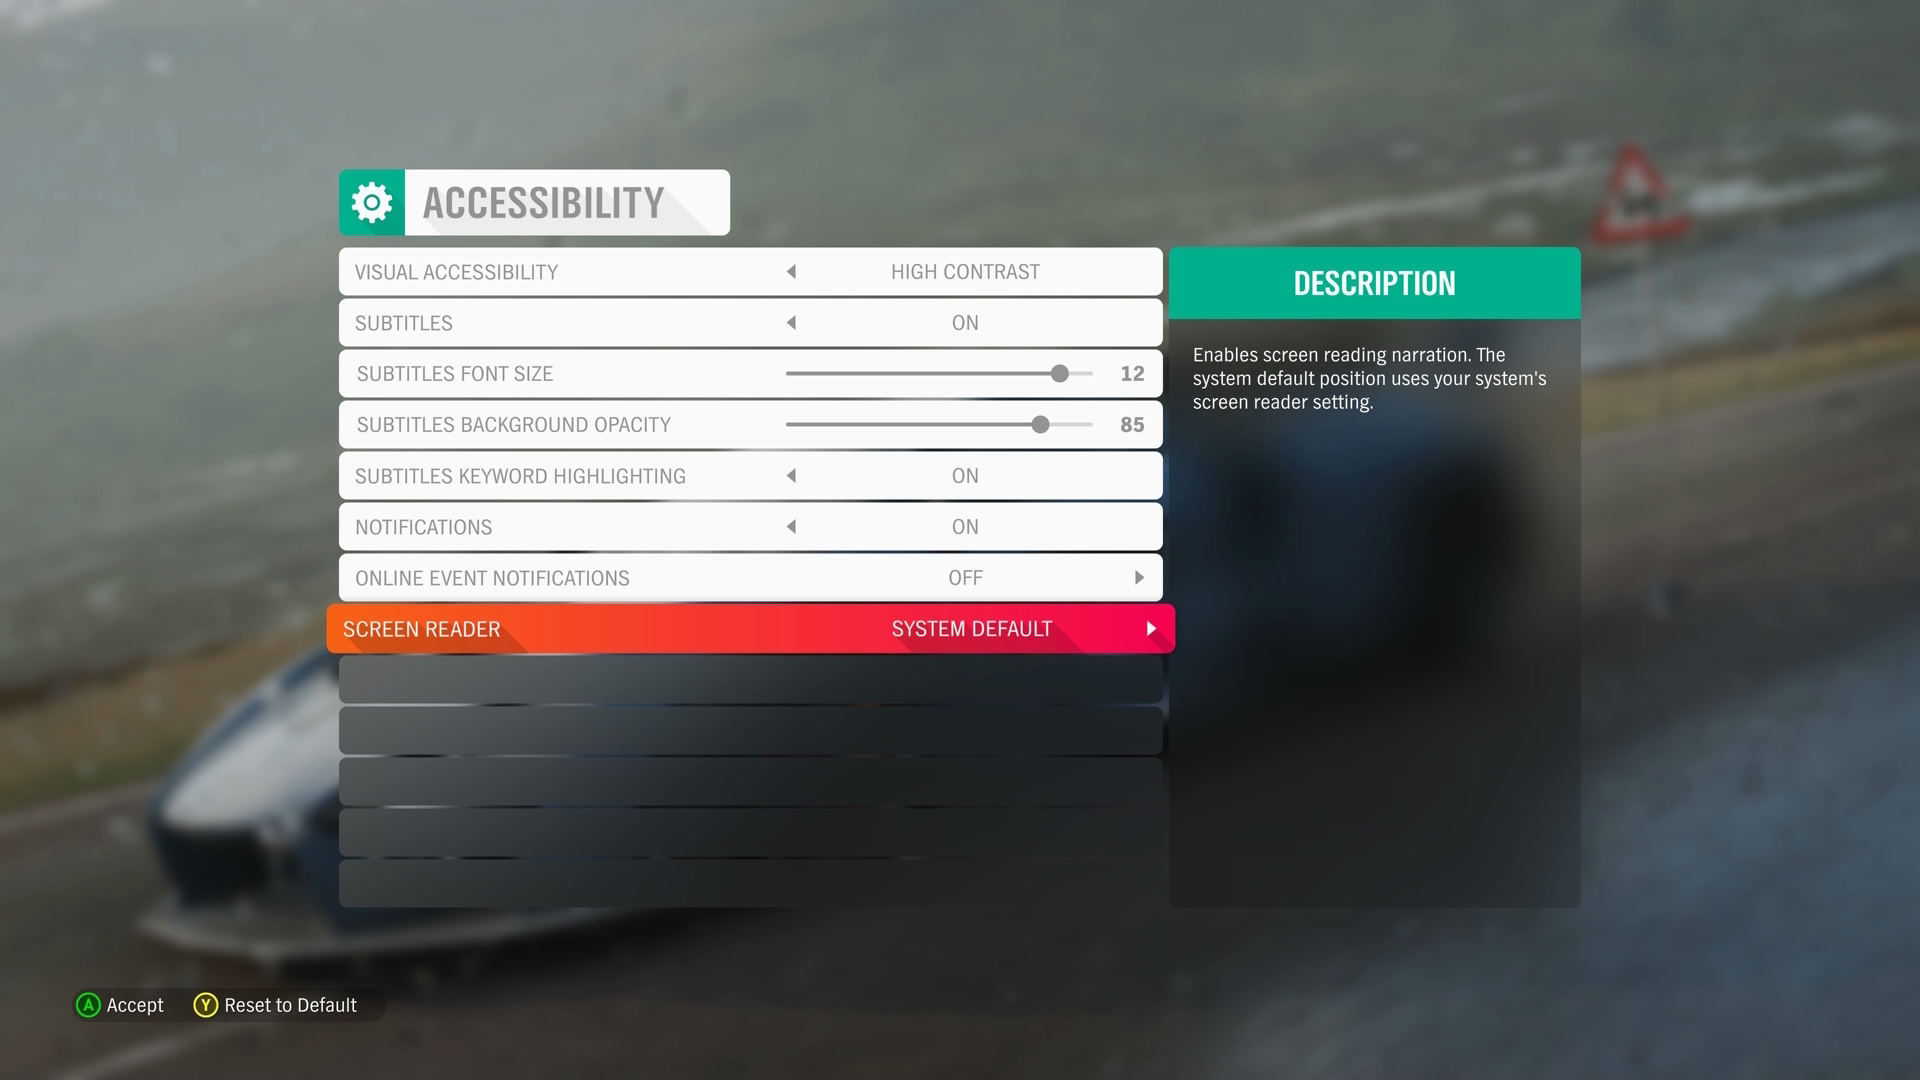 A screenshot from Forza Horizon 4 that shows the "Accessibility" settings menu. The "Screen Reader" item is highlighted and set to "System Default."